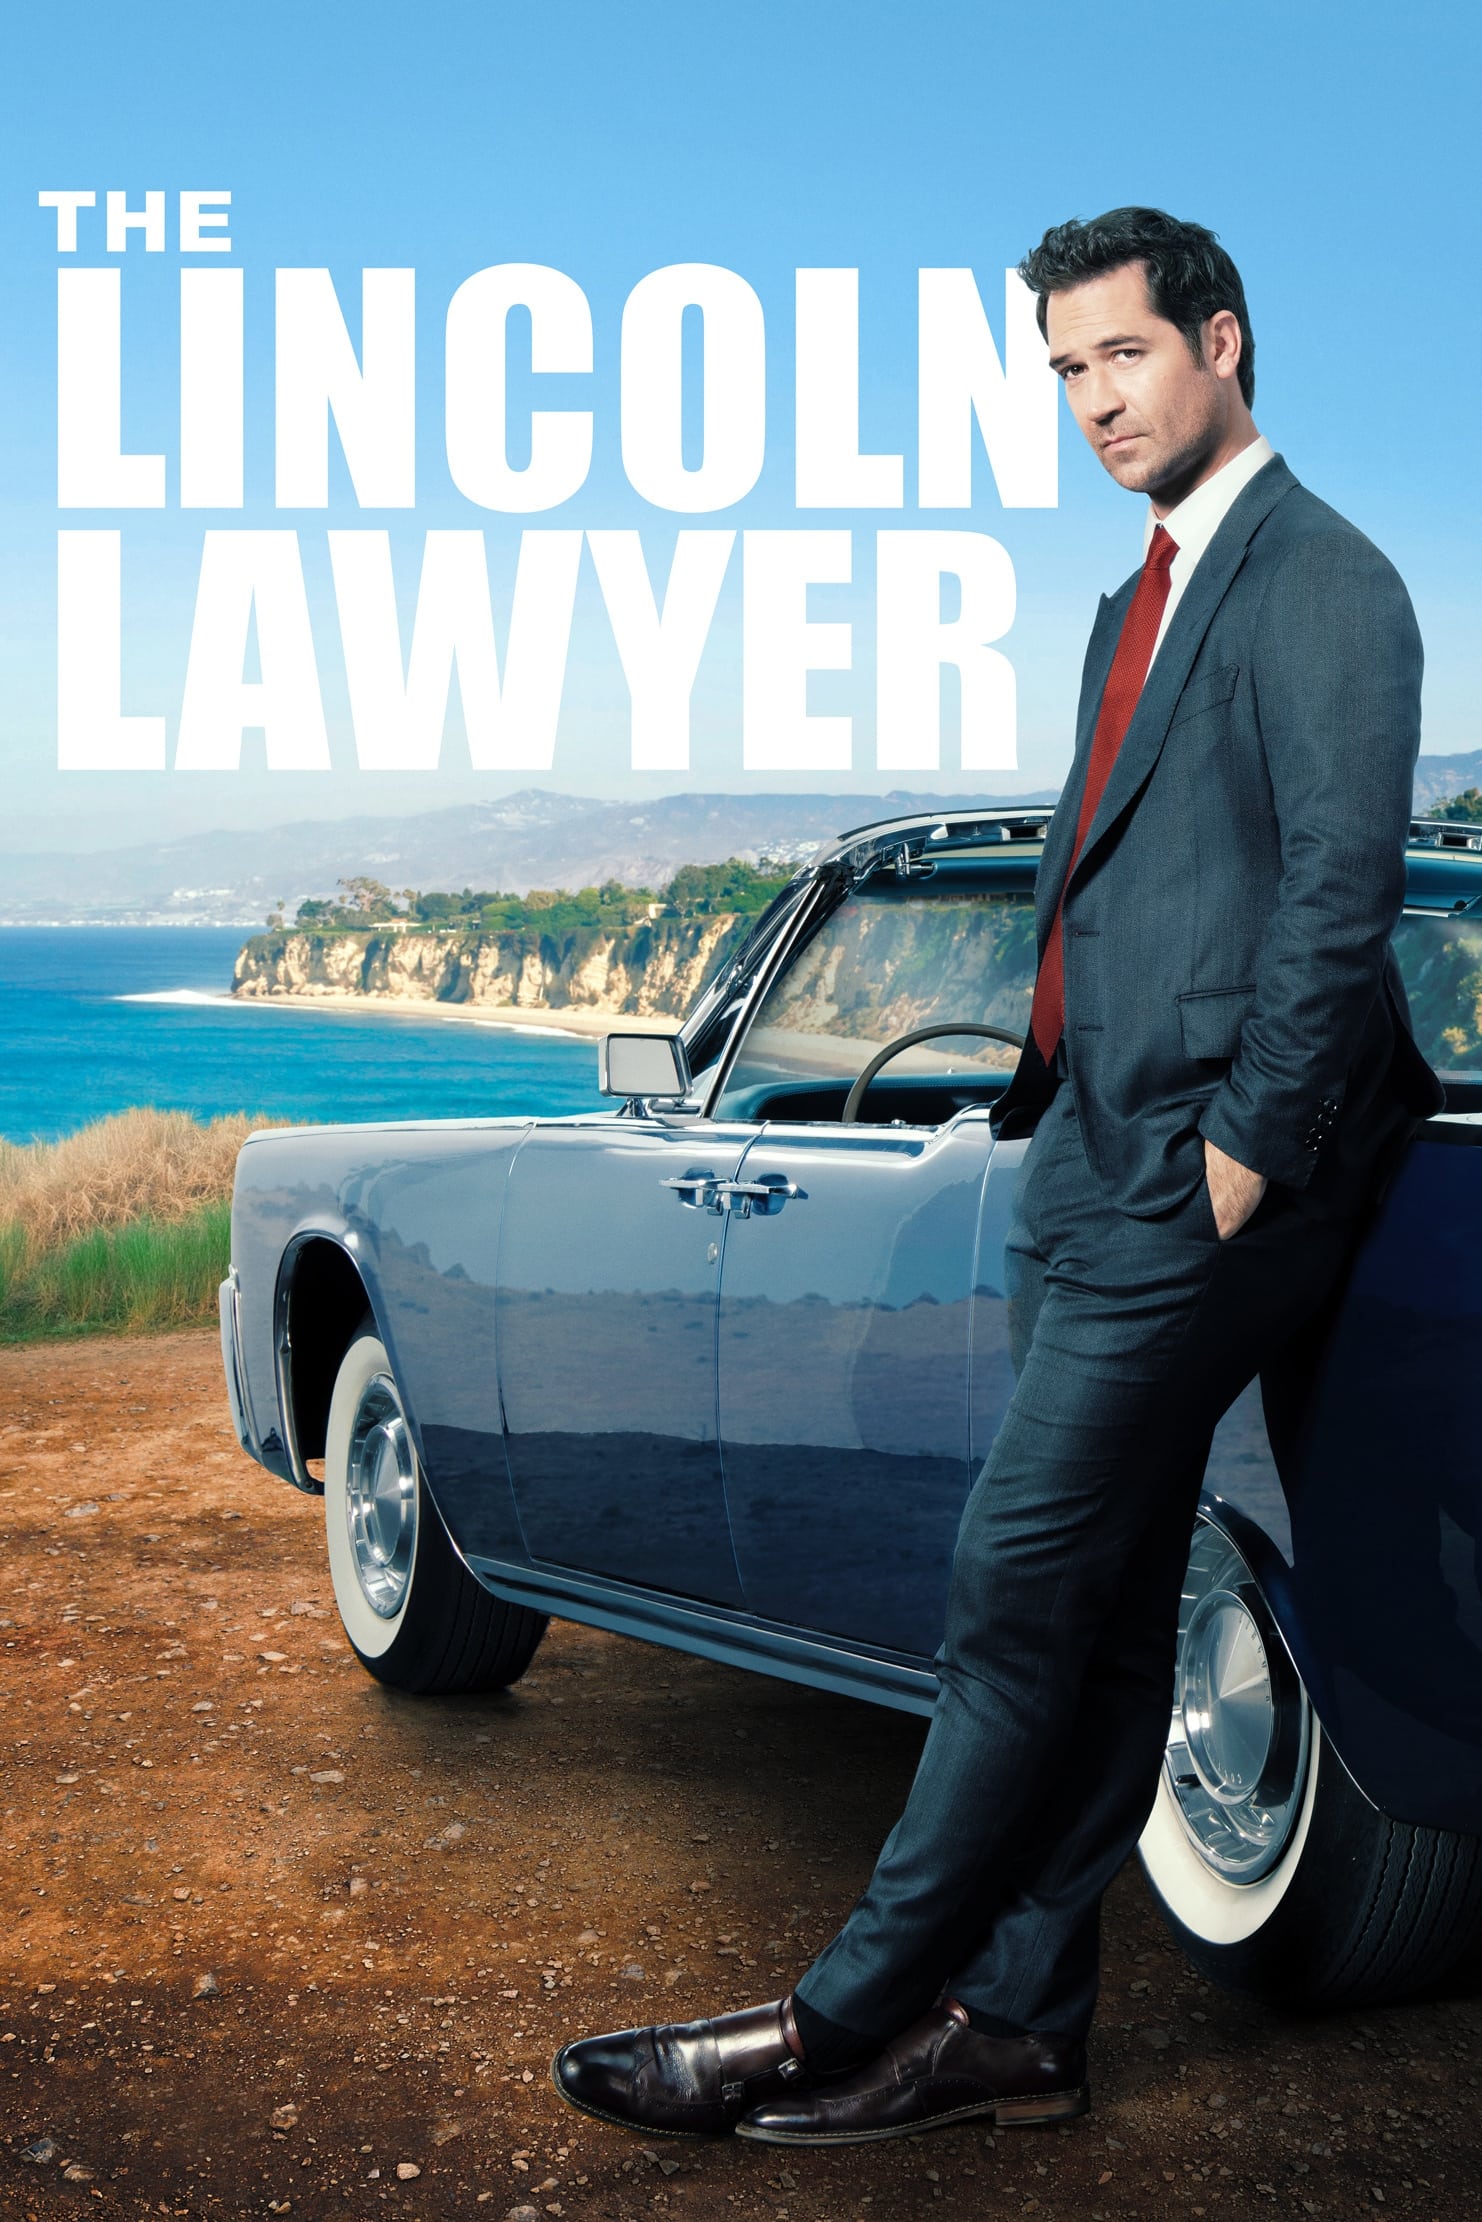 The Lincoln Lawyer TV Shows About Psychological